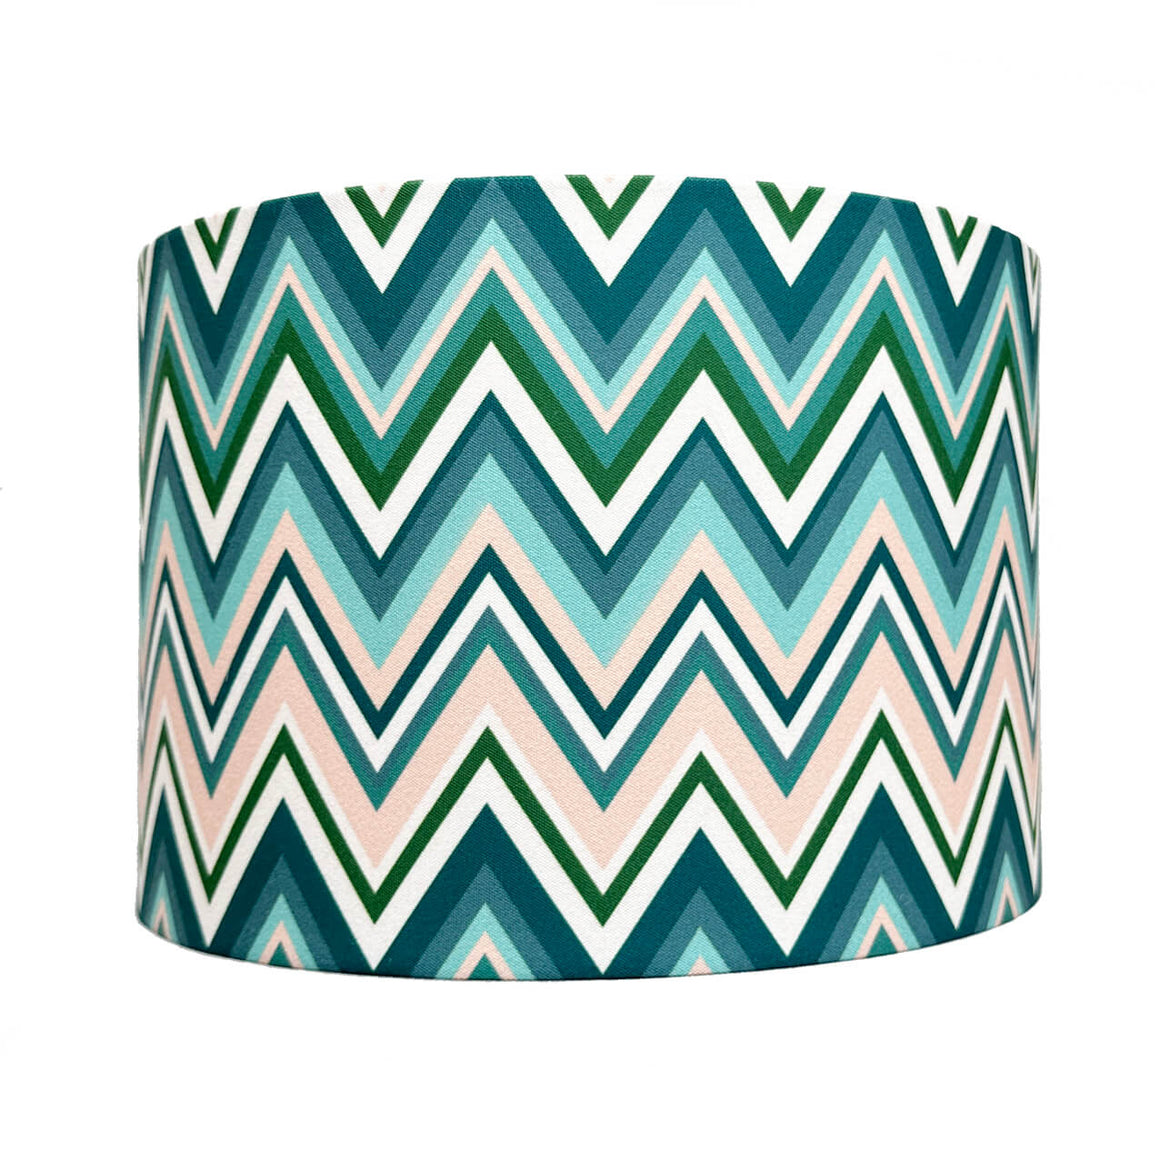 Zig Zag in Blue Fig lampshade